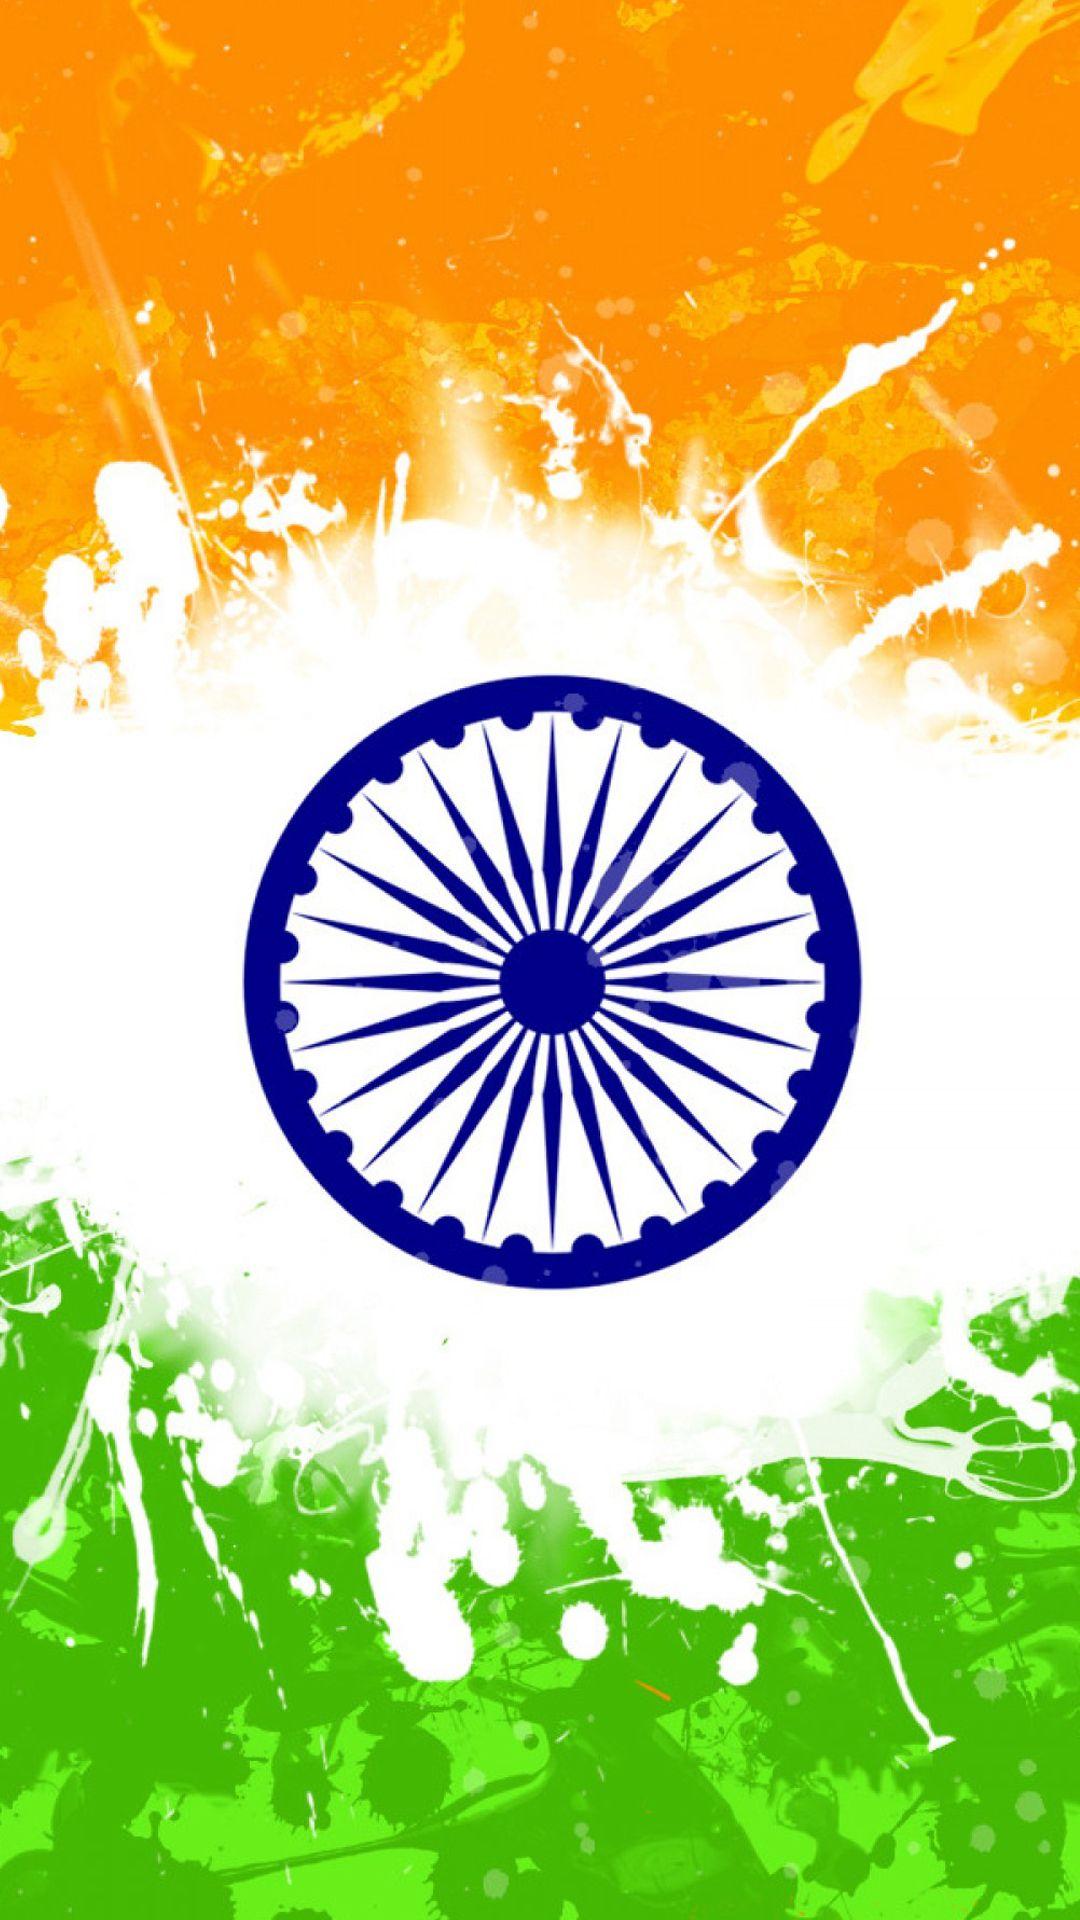 India Flag for Mobile Phone Wallpaper 06 of 17